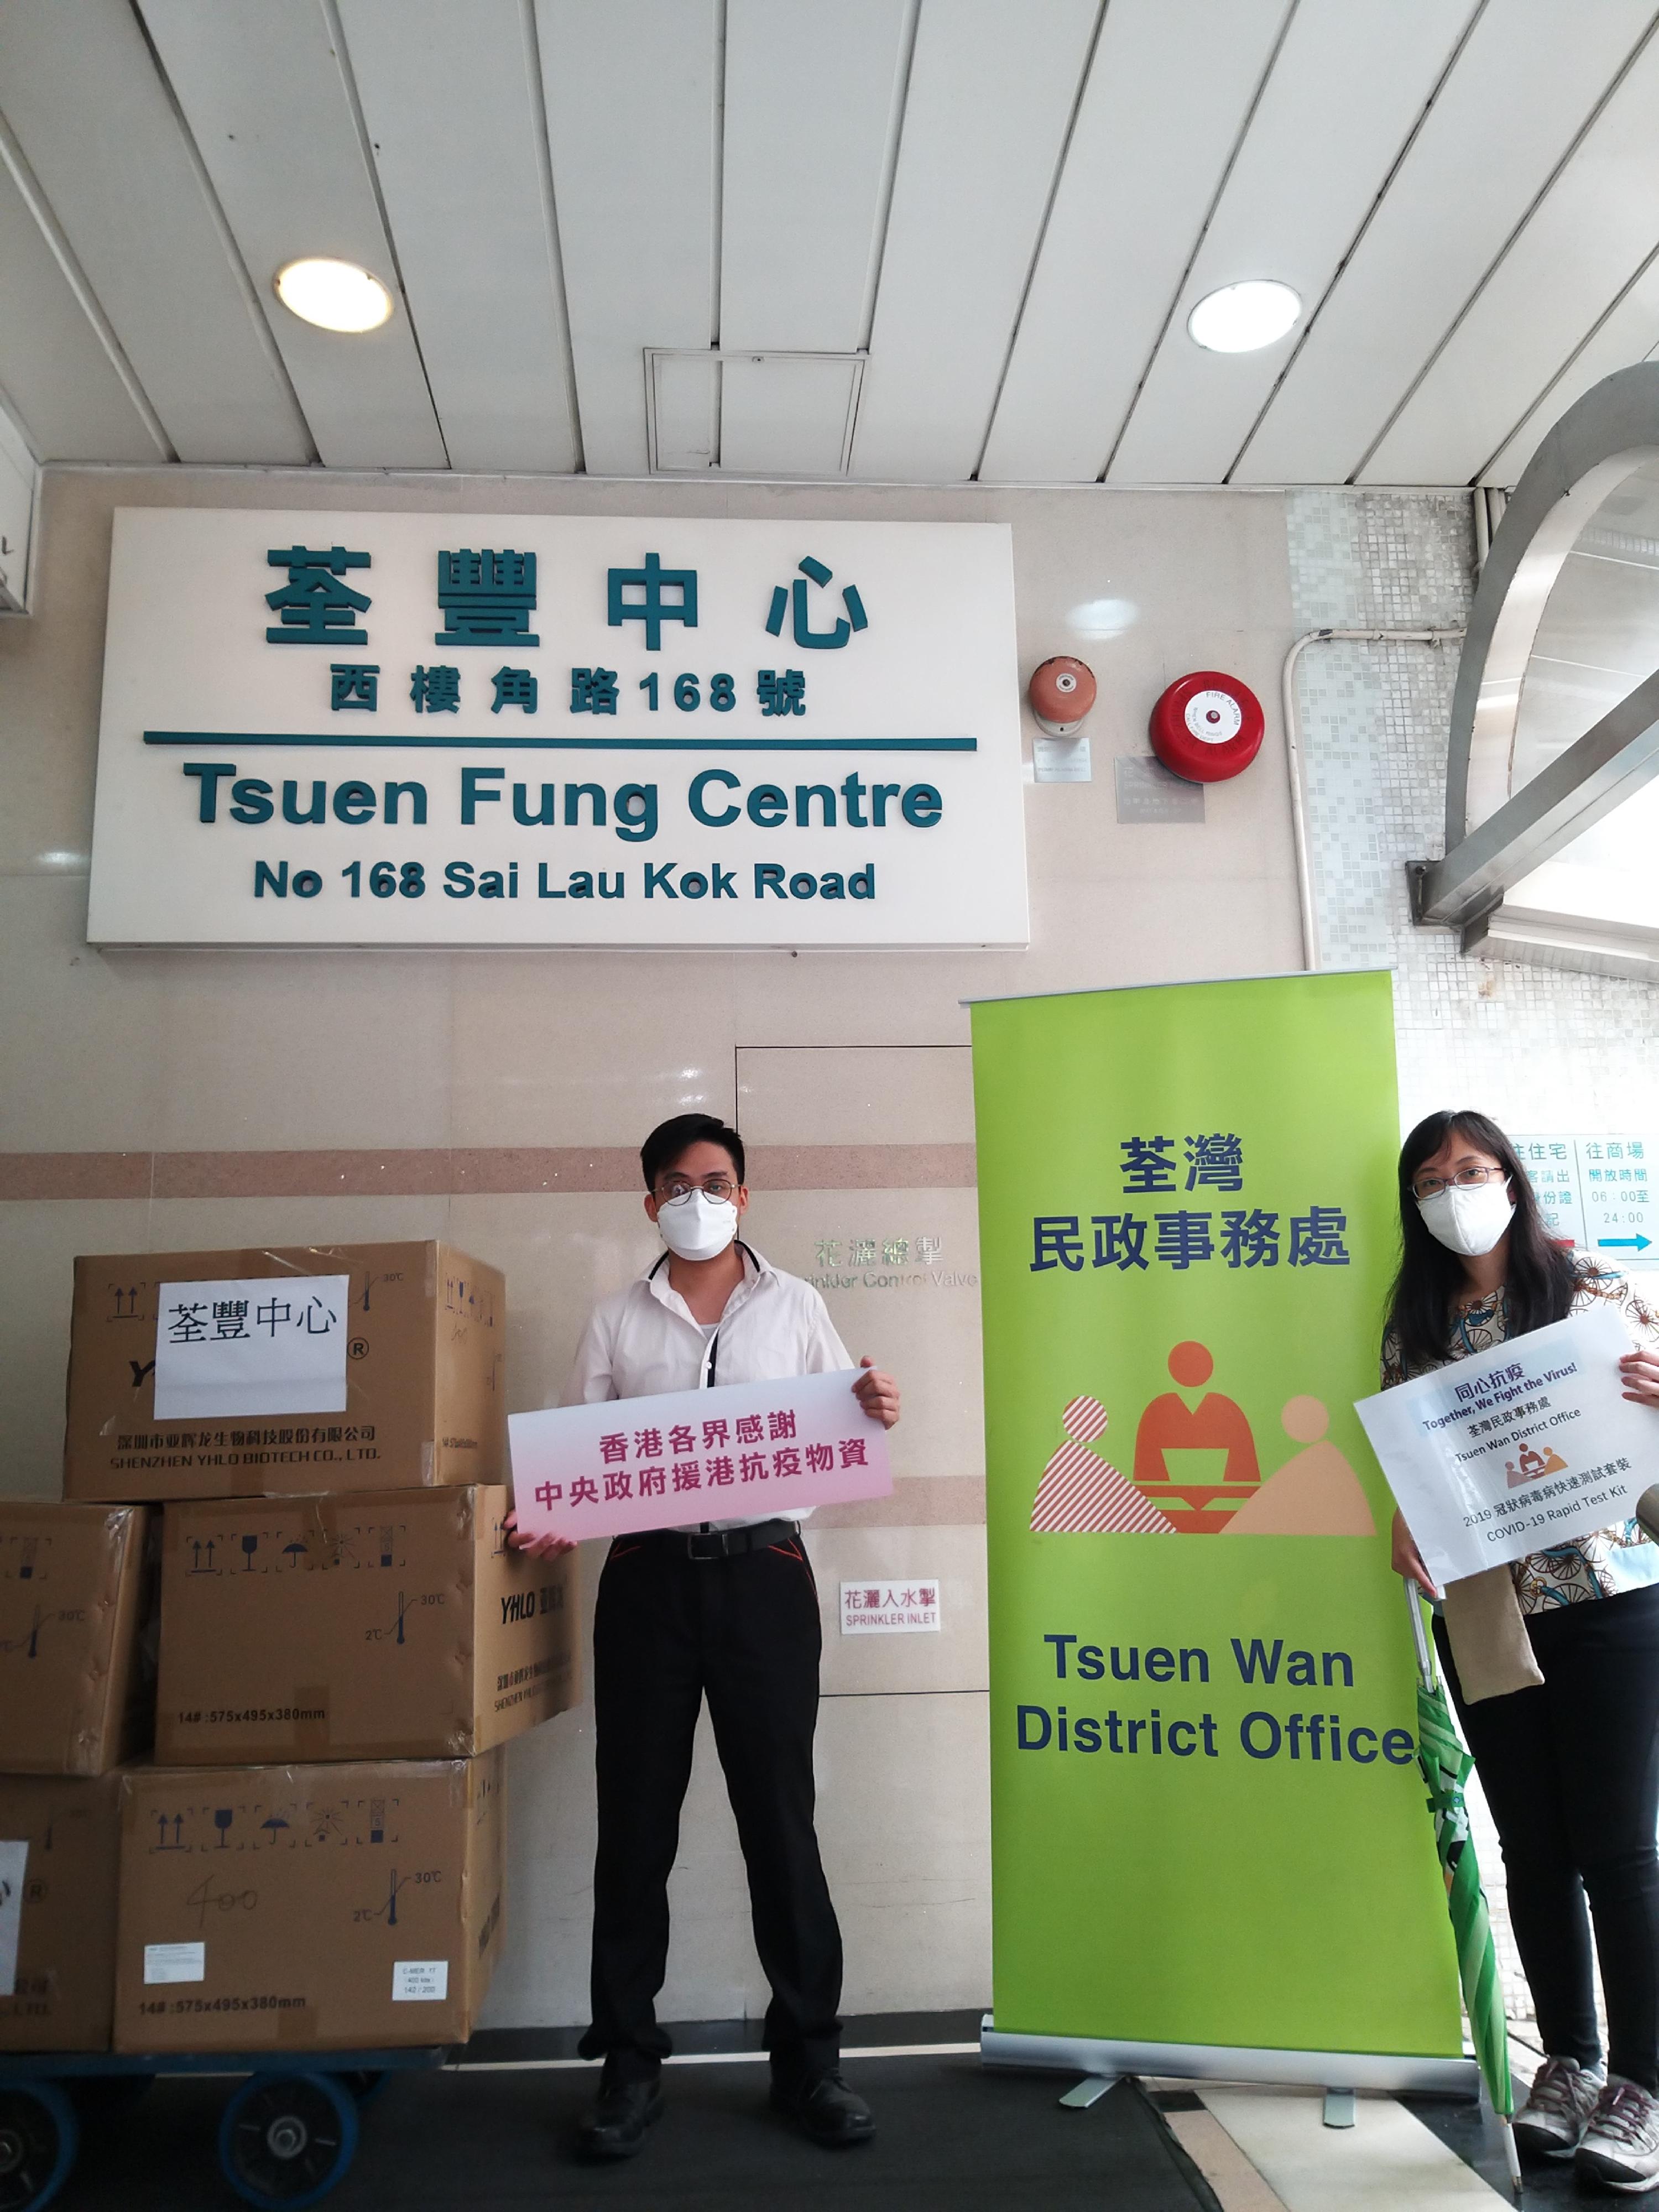 The Tsuen Wan District Office today (June 16) distributed COVID-19 rapid test kits to households, cleansing workers and property management staff living and working in Tsuen Fung Centre for voluntary testing through the property management company.